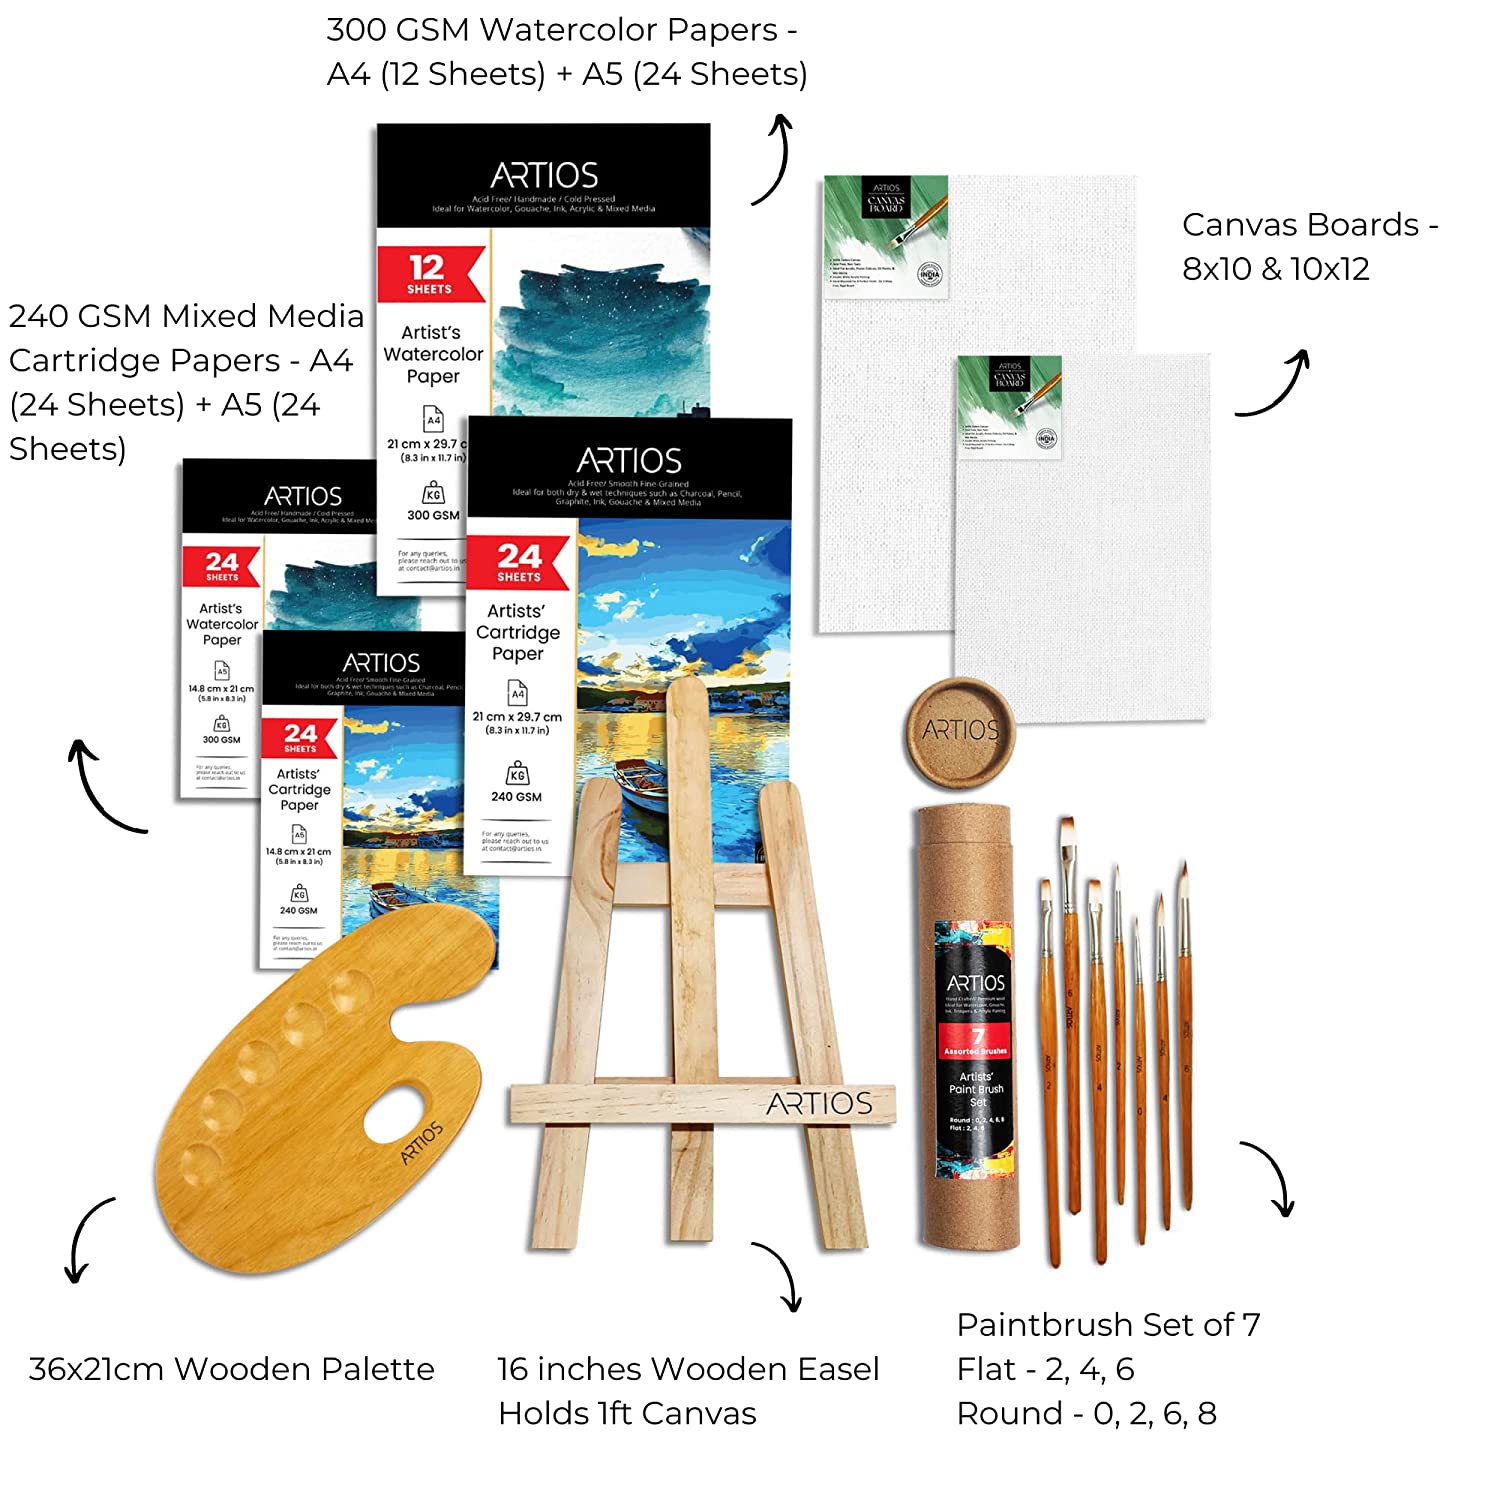 Painting Kit for Artists - 95 Pcs Painting Set for Adults and Kids – ARTIOS